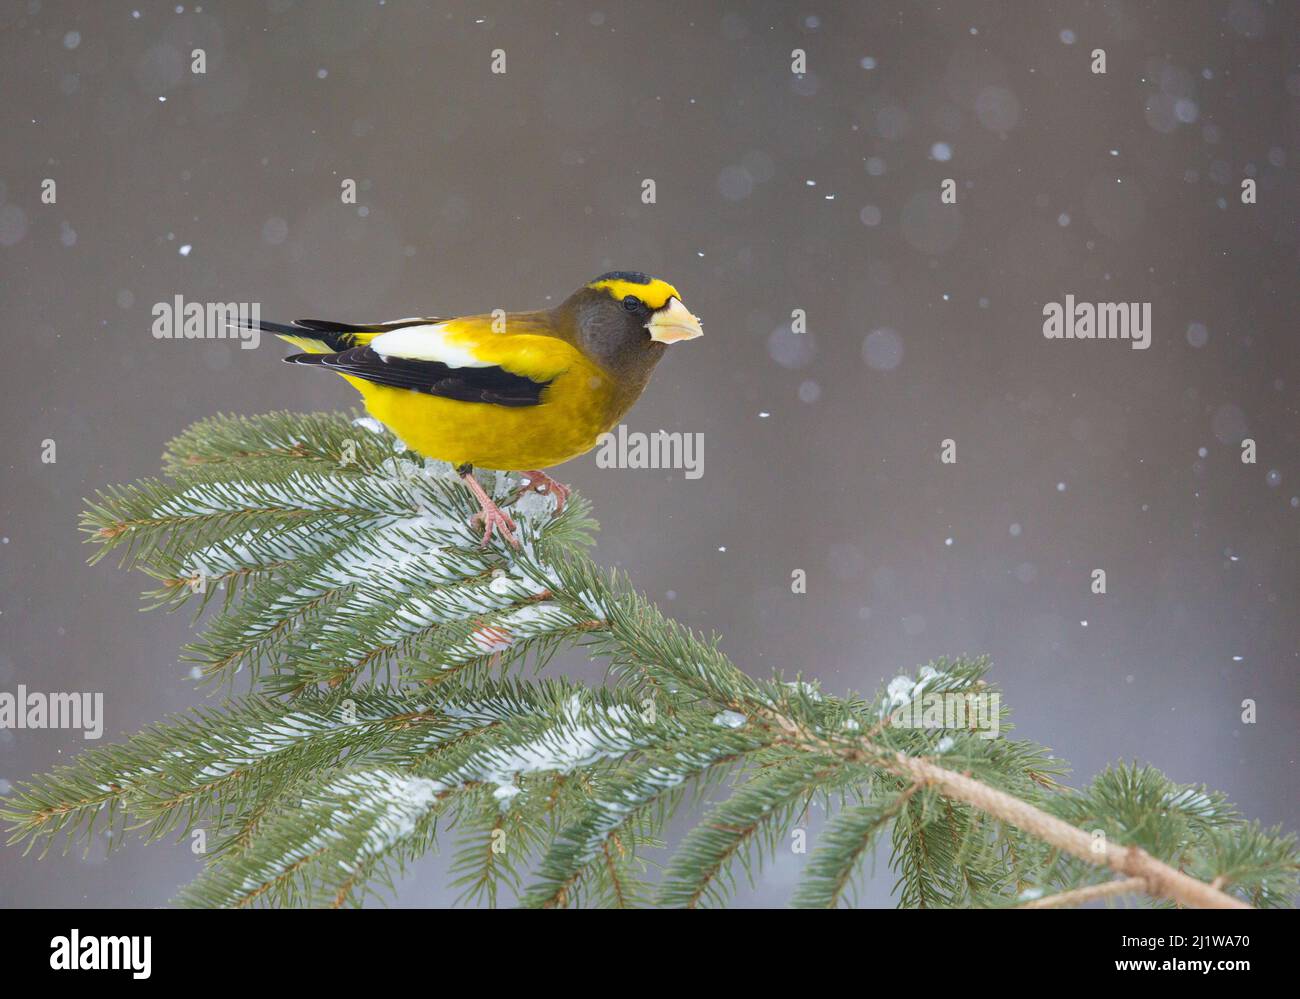 Evening Grosbeak (Coccothraustes vespertinus) male perched on spruce branch with falling snow, in winter, New York, USA Stock Photo